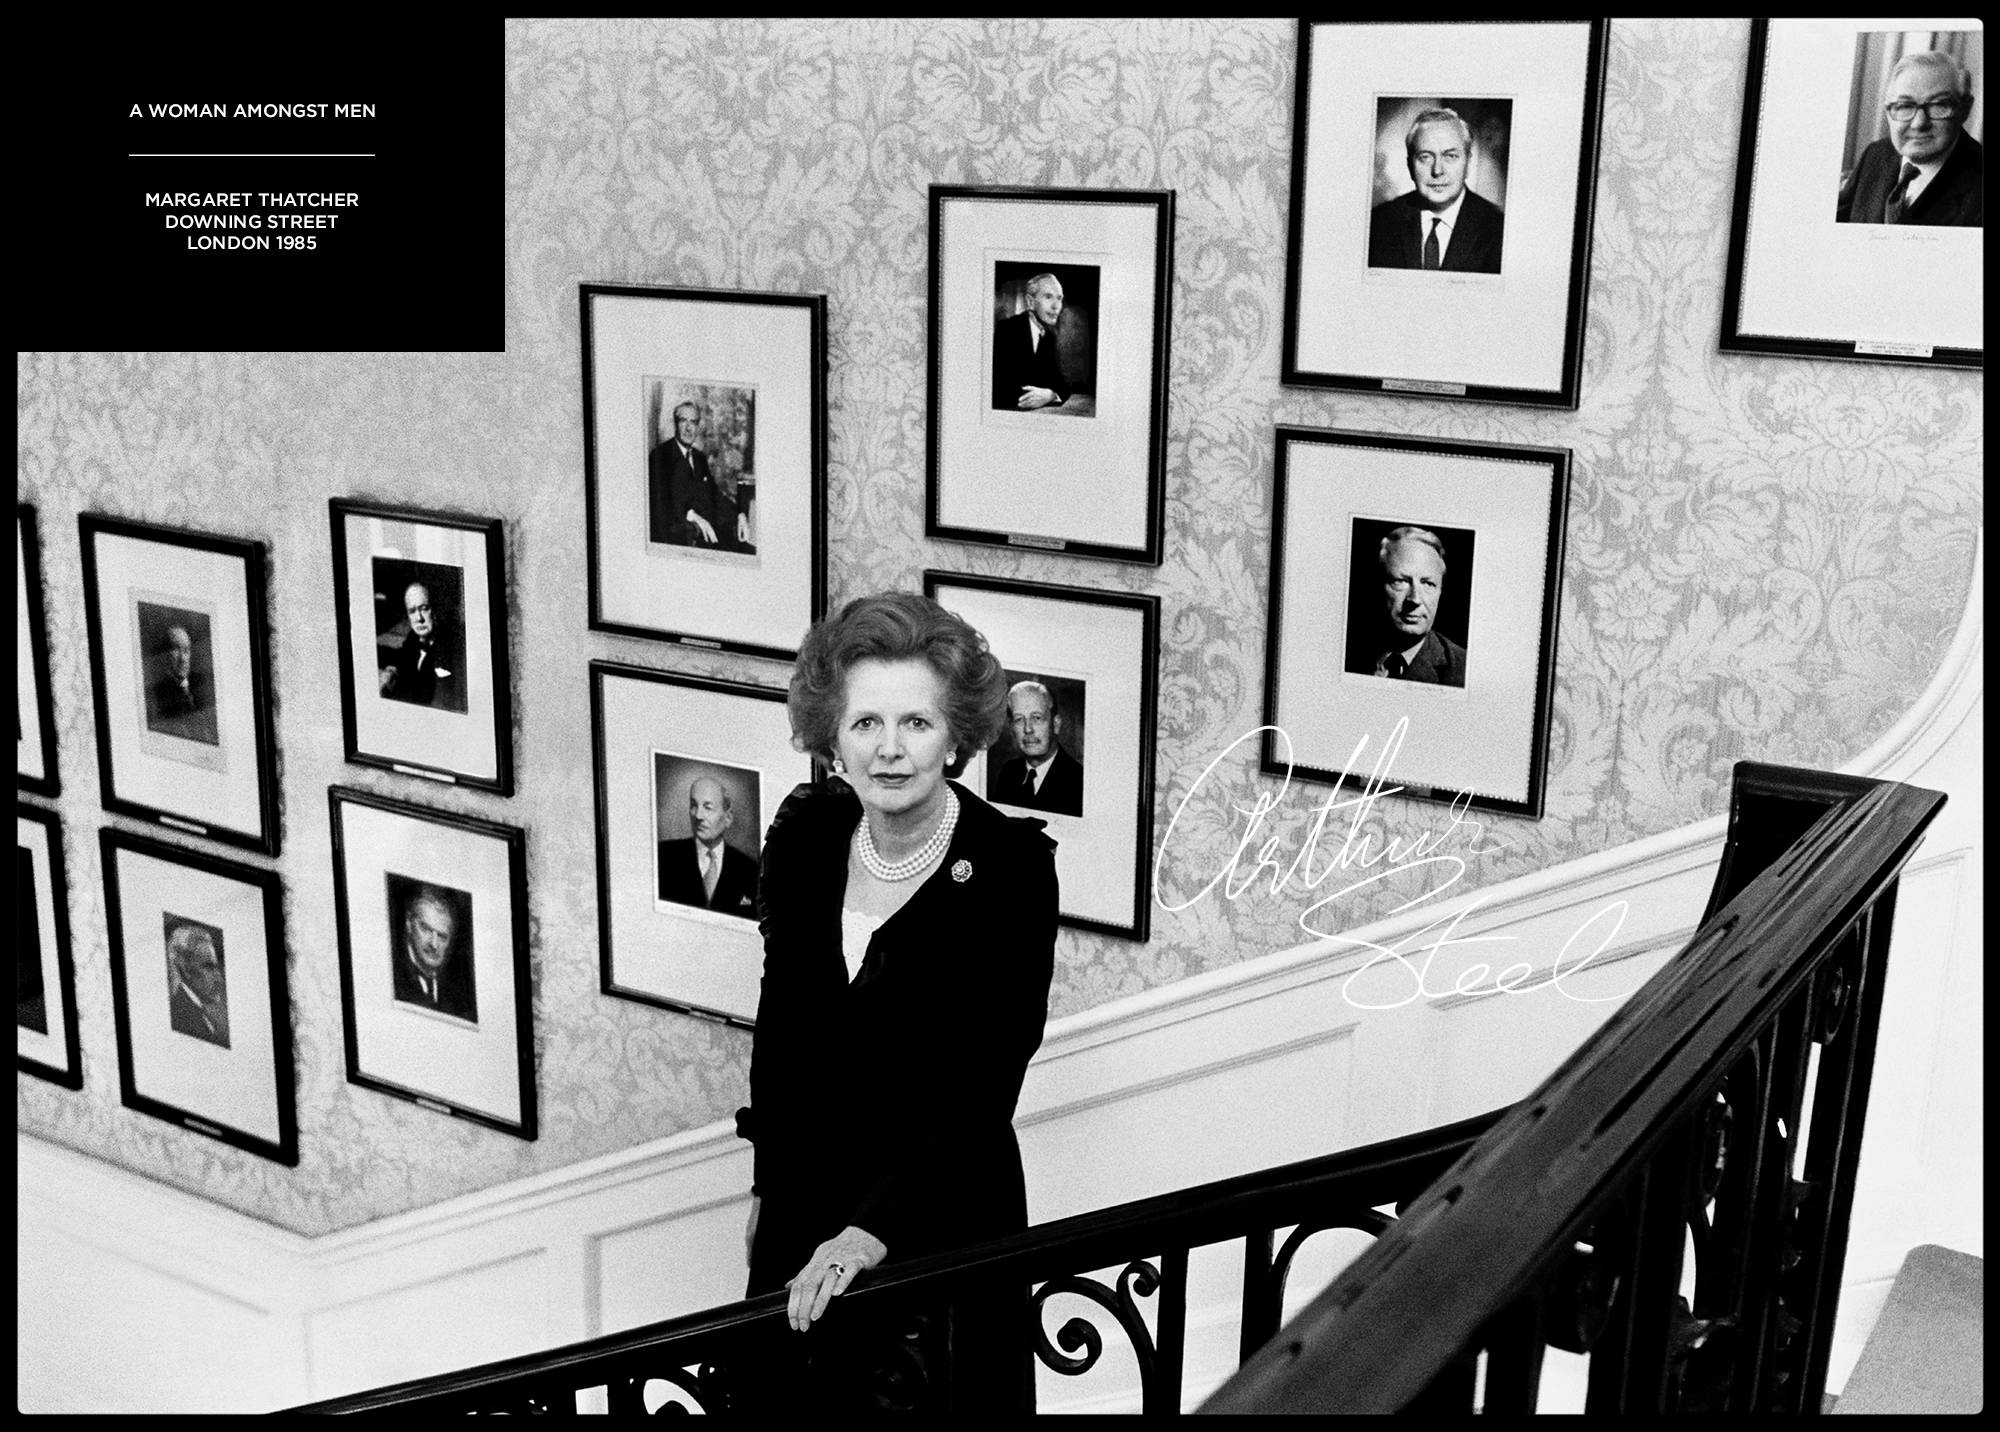 margaret-thatcher-rare-black-and-white-photograph-by-arthur-steel